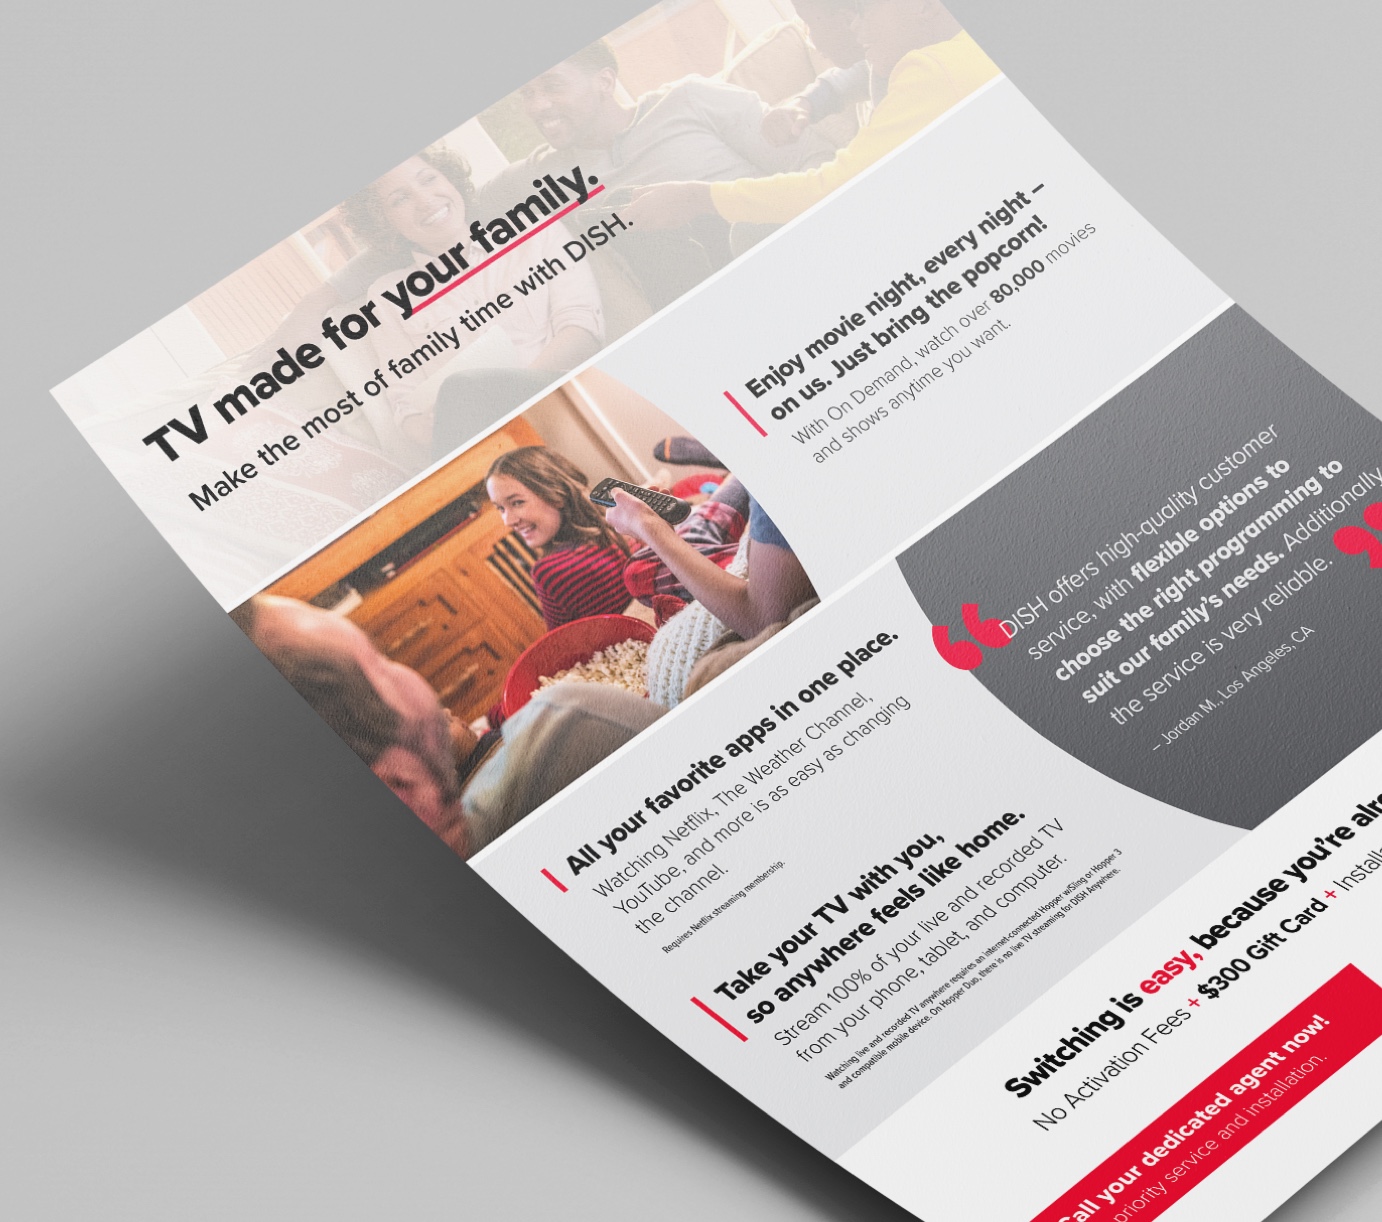 Letter page with headline 'TV made for your family' with offer details and family watching TV.